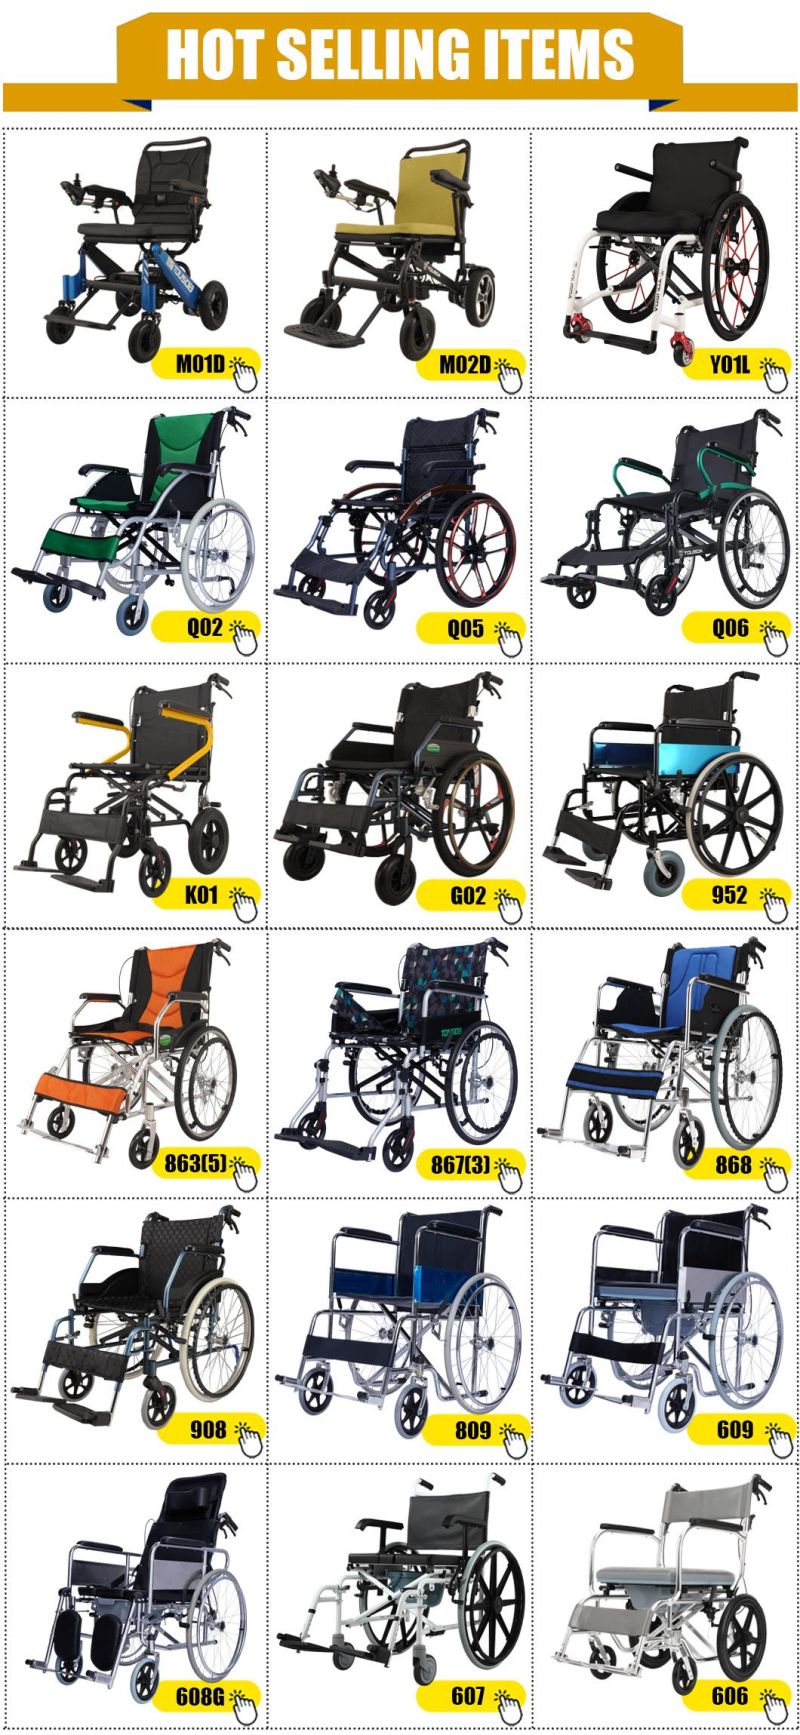 Rehabilitation Therapy Supplies Light Weight Steel Wheelchair with Transfer Commode Chair